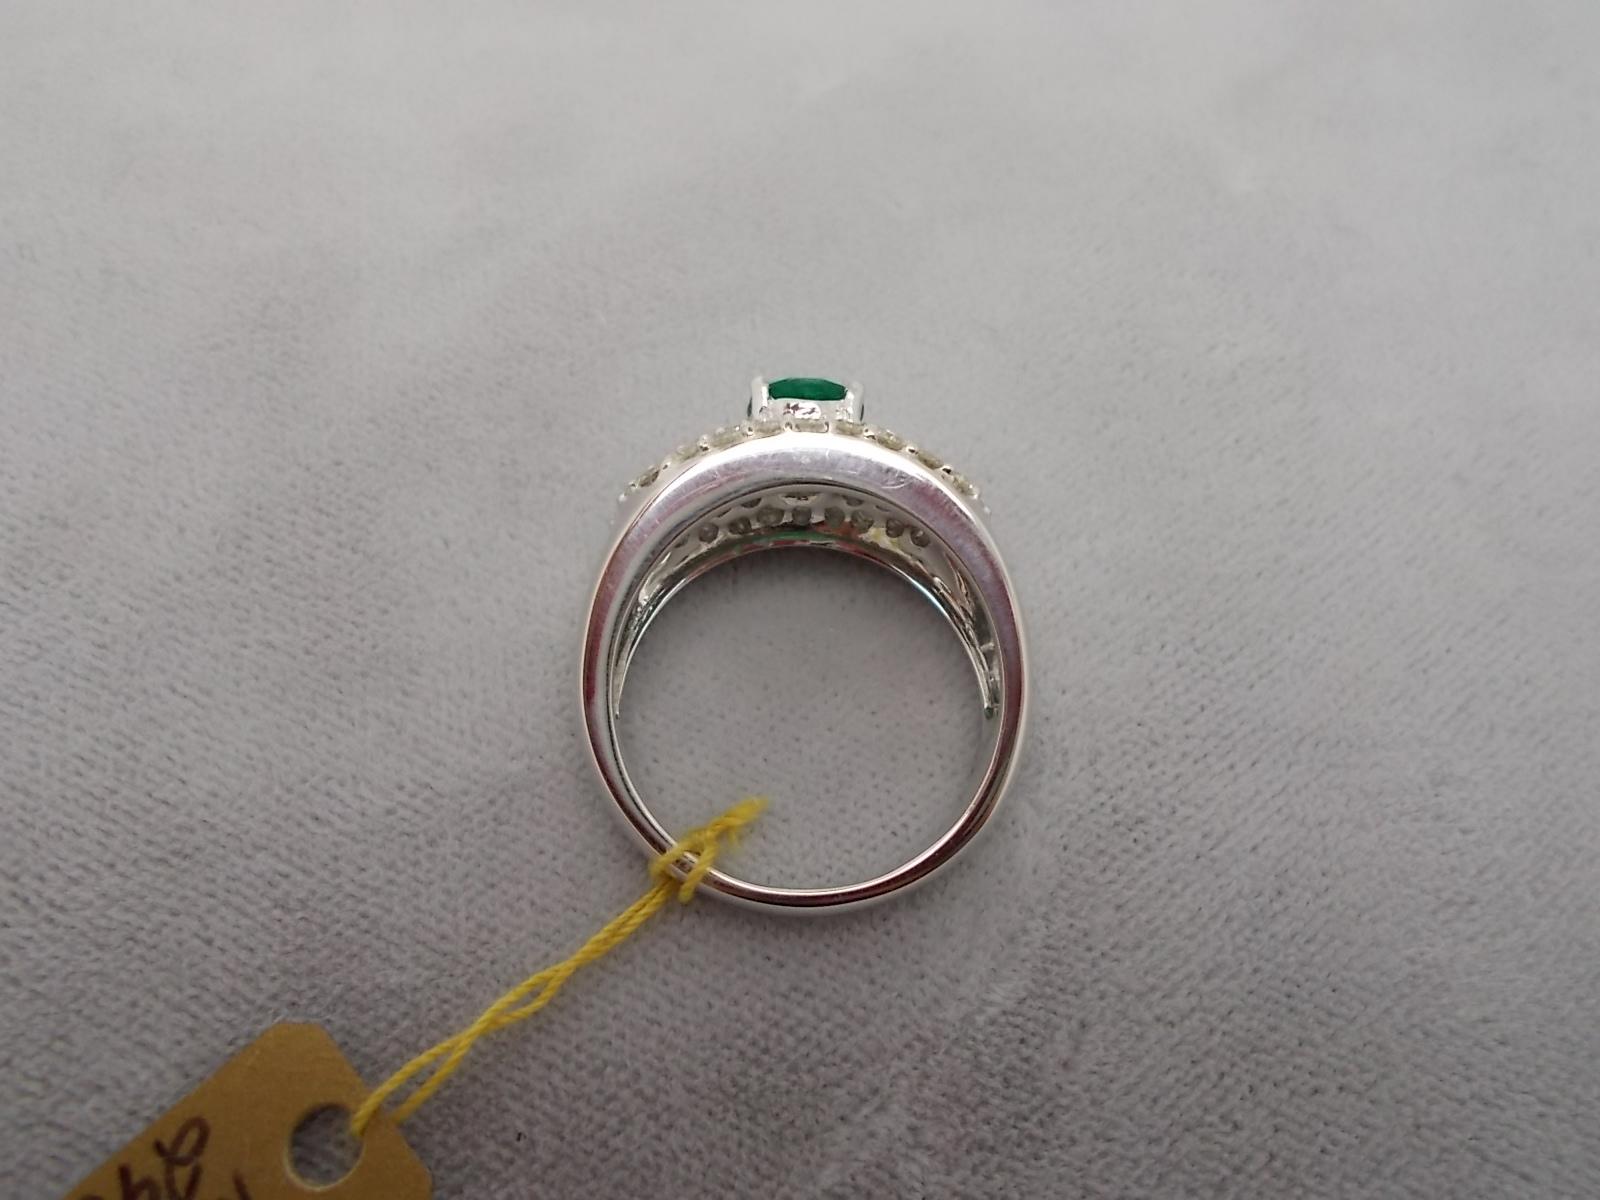 Brilliant Cut 14k White Gold .81ct Genuine Natural Emerald Ring with Diamonds '#J667' For Sale